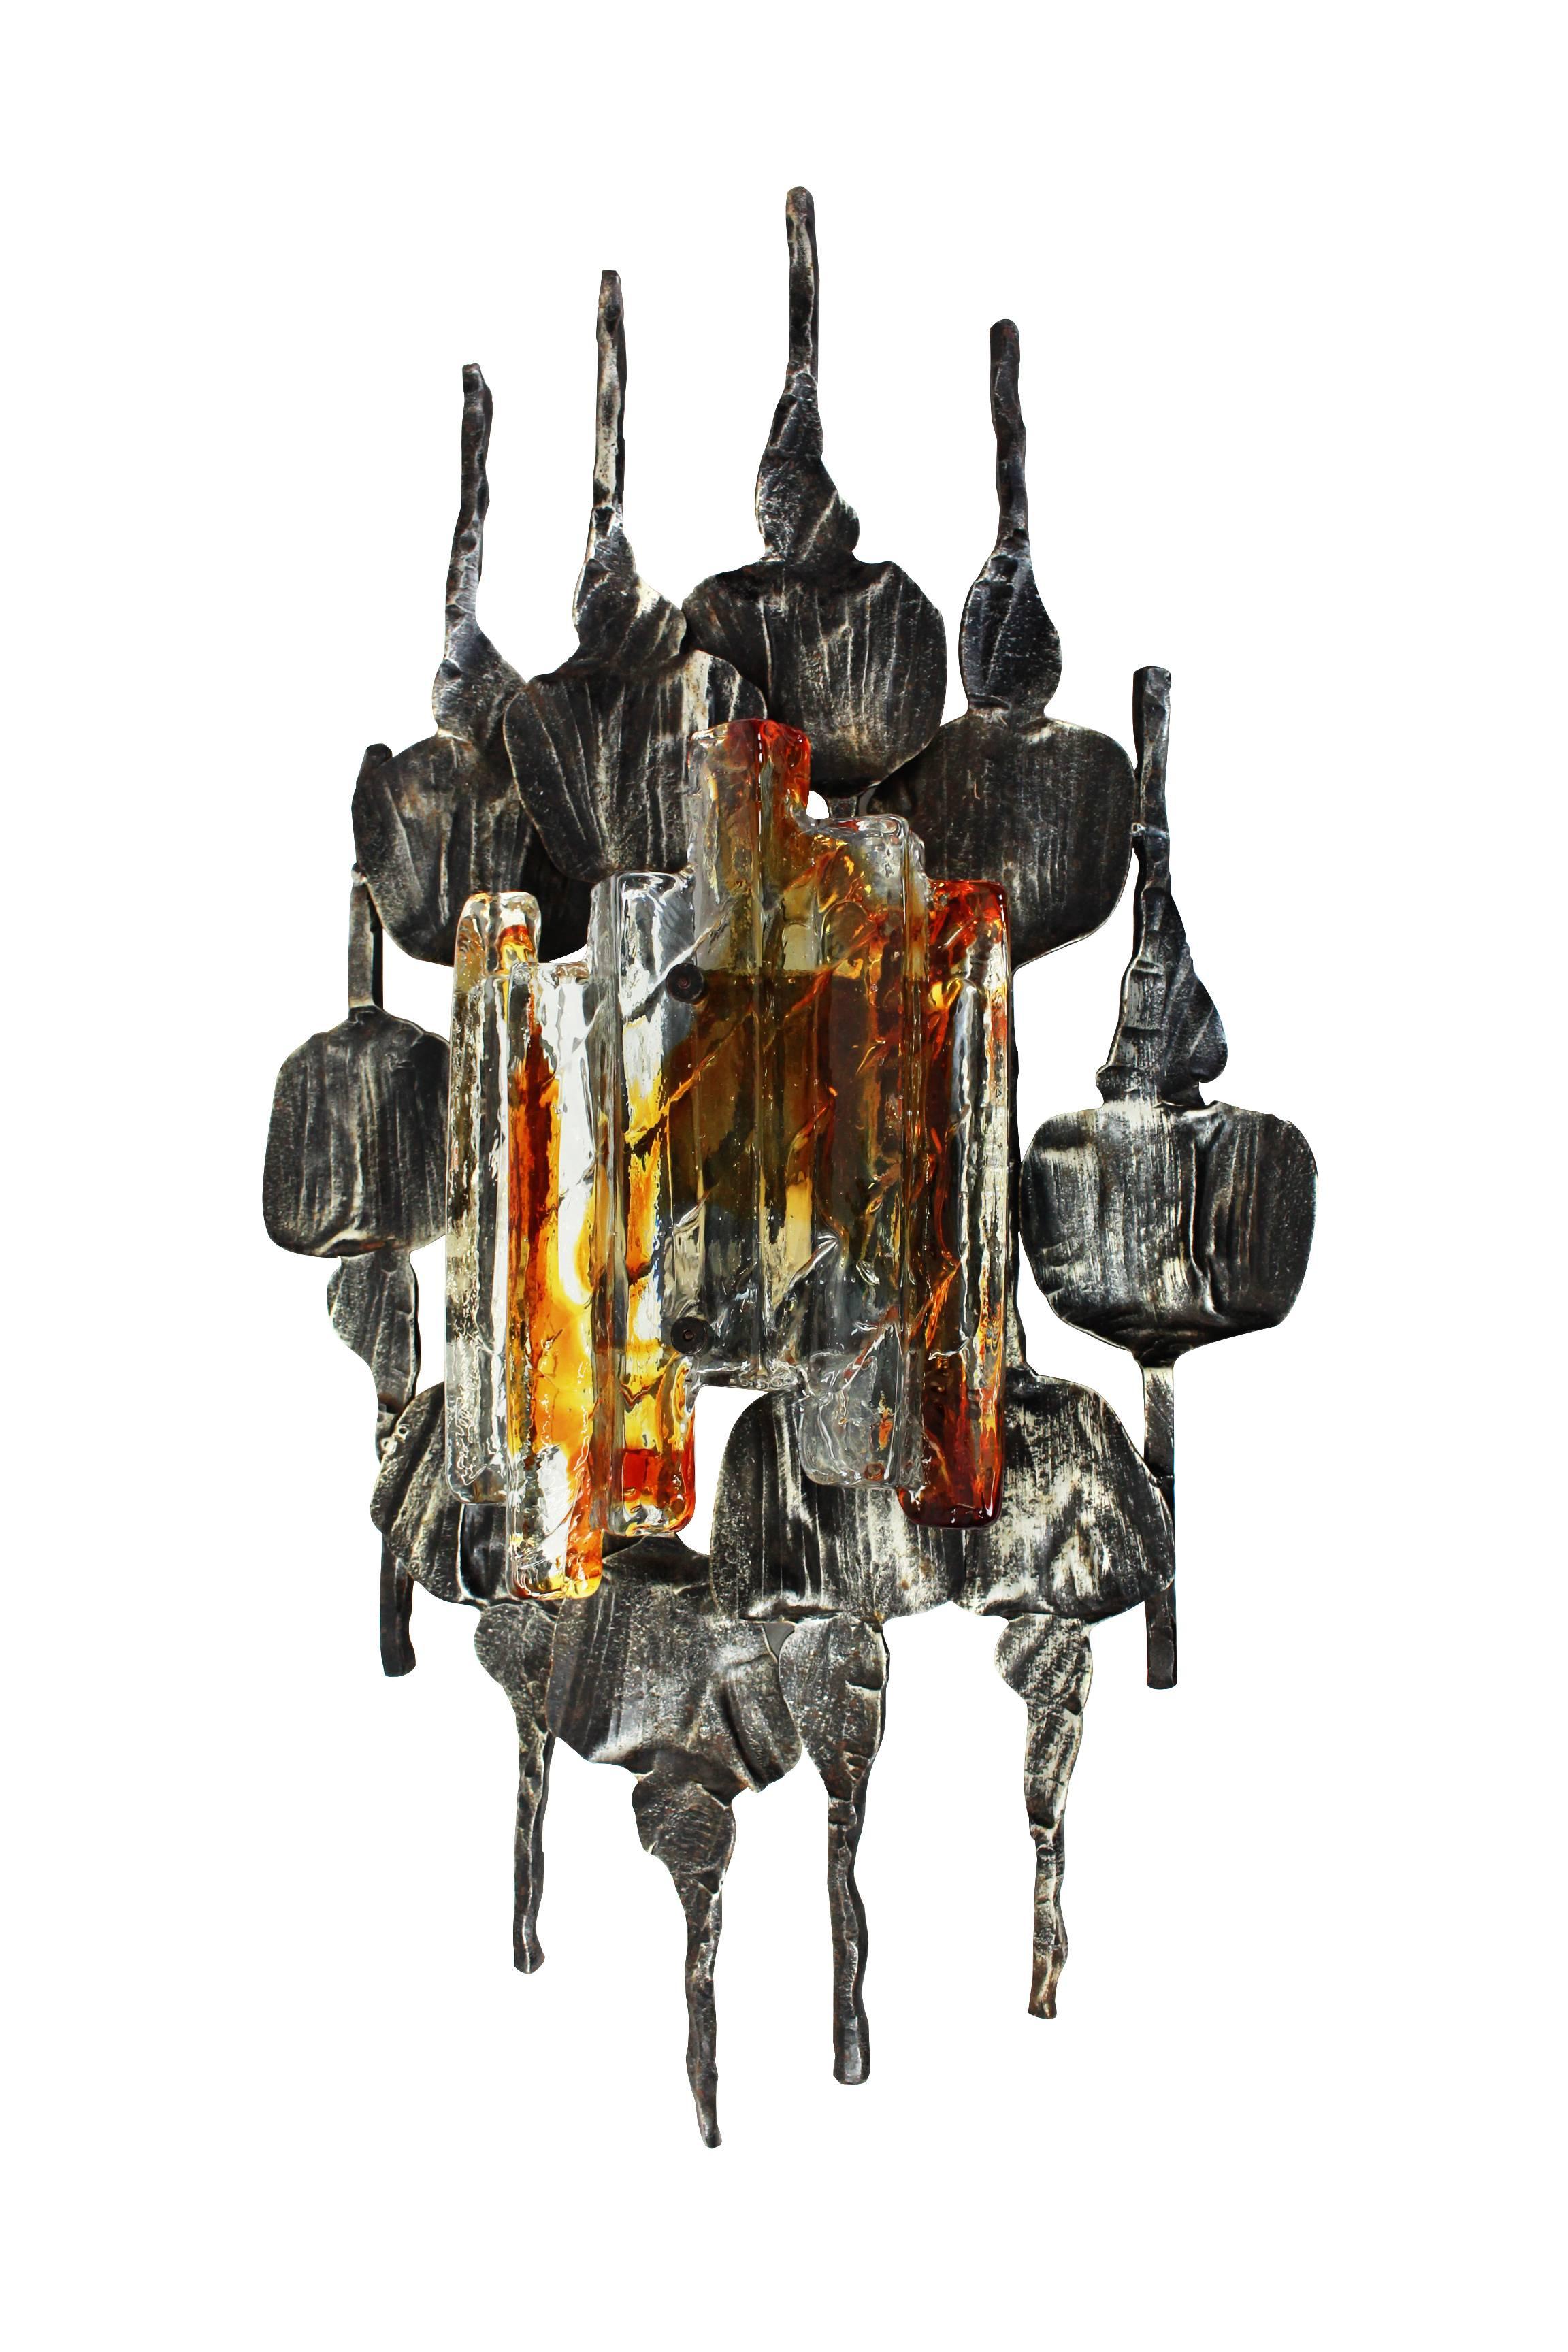 Wonderful pair of Mid-Century Brutalist wall sconces designed by Tom Ahlstrom and Hans Ehrlich, Sweden, circa 1960-1969.
Nice Brutalist shape with a unique Murano glass.

Each sconce needs one x E27 standard bulb.
Excellent condition.

Please